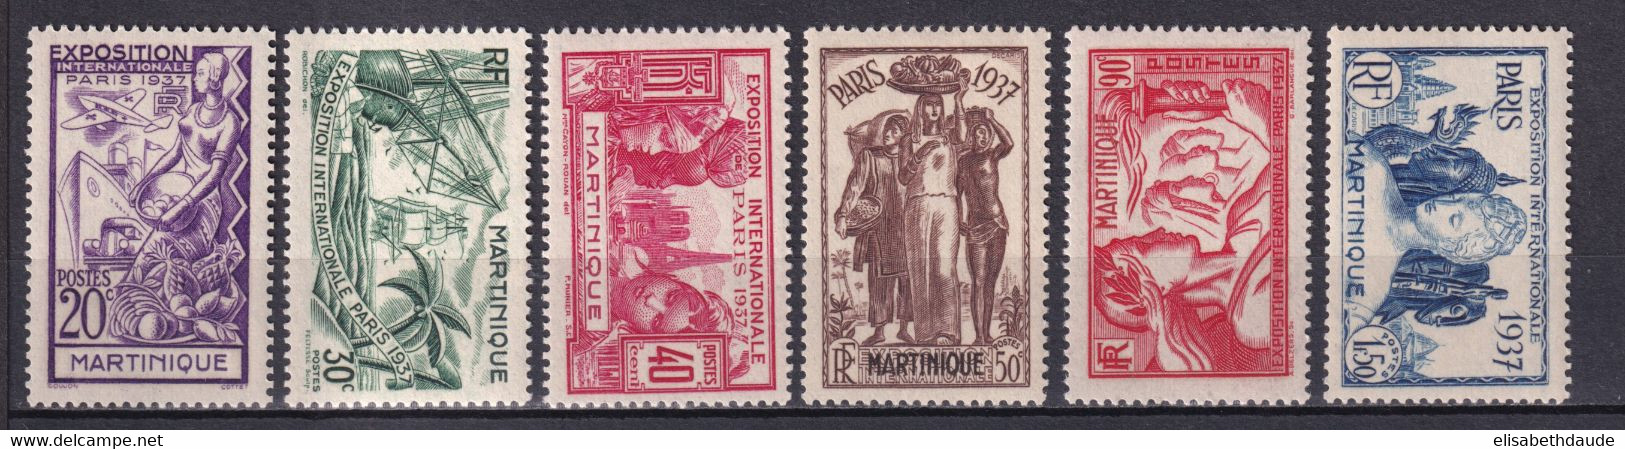 EXPO 37 - MARTINIQUE - YVERT N°161/166 * MLH - COTE = 17.5 EUROS - - Unused Stamps